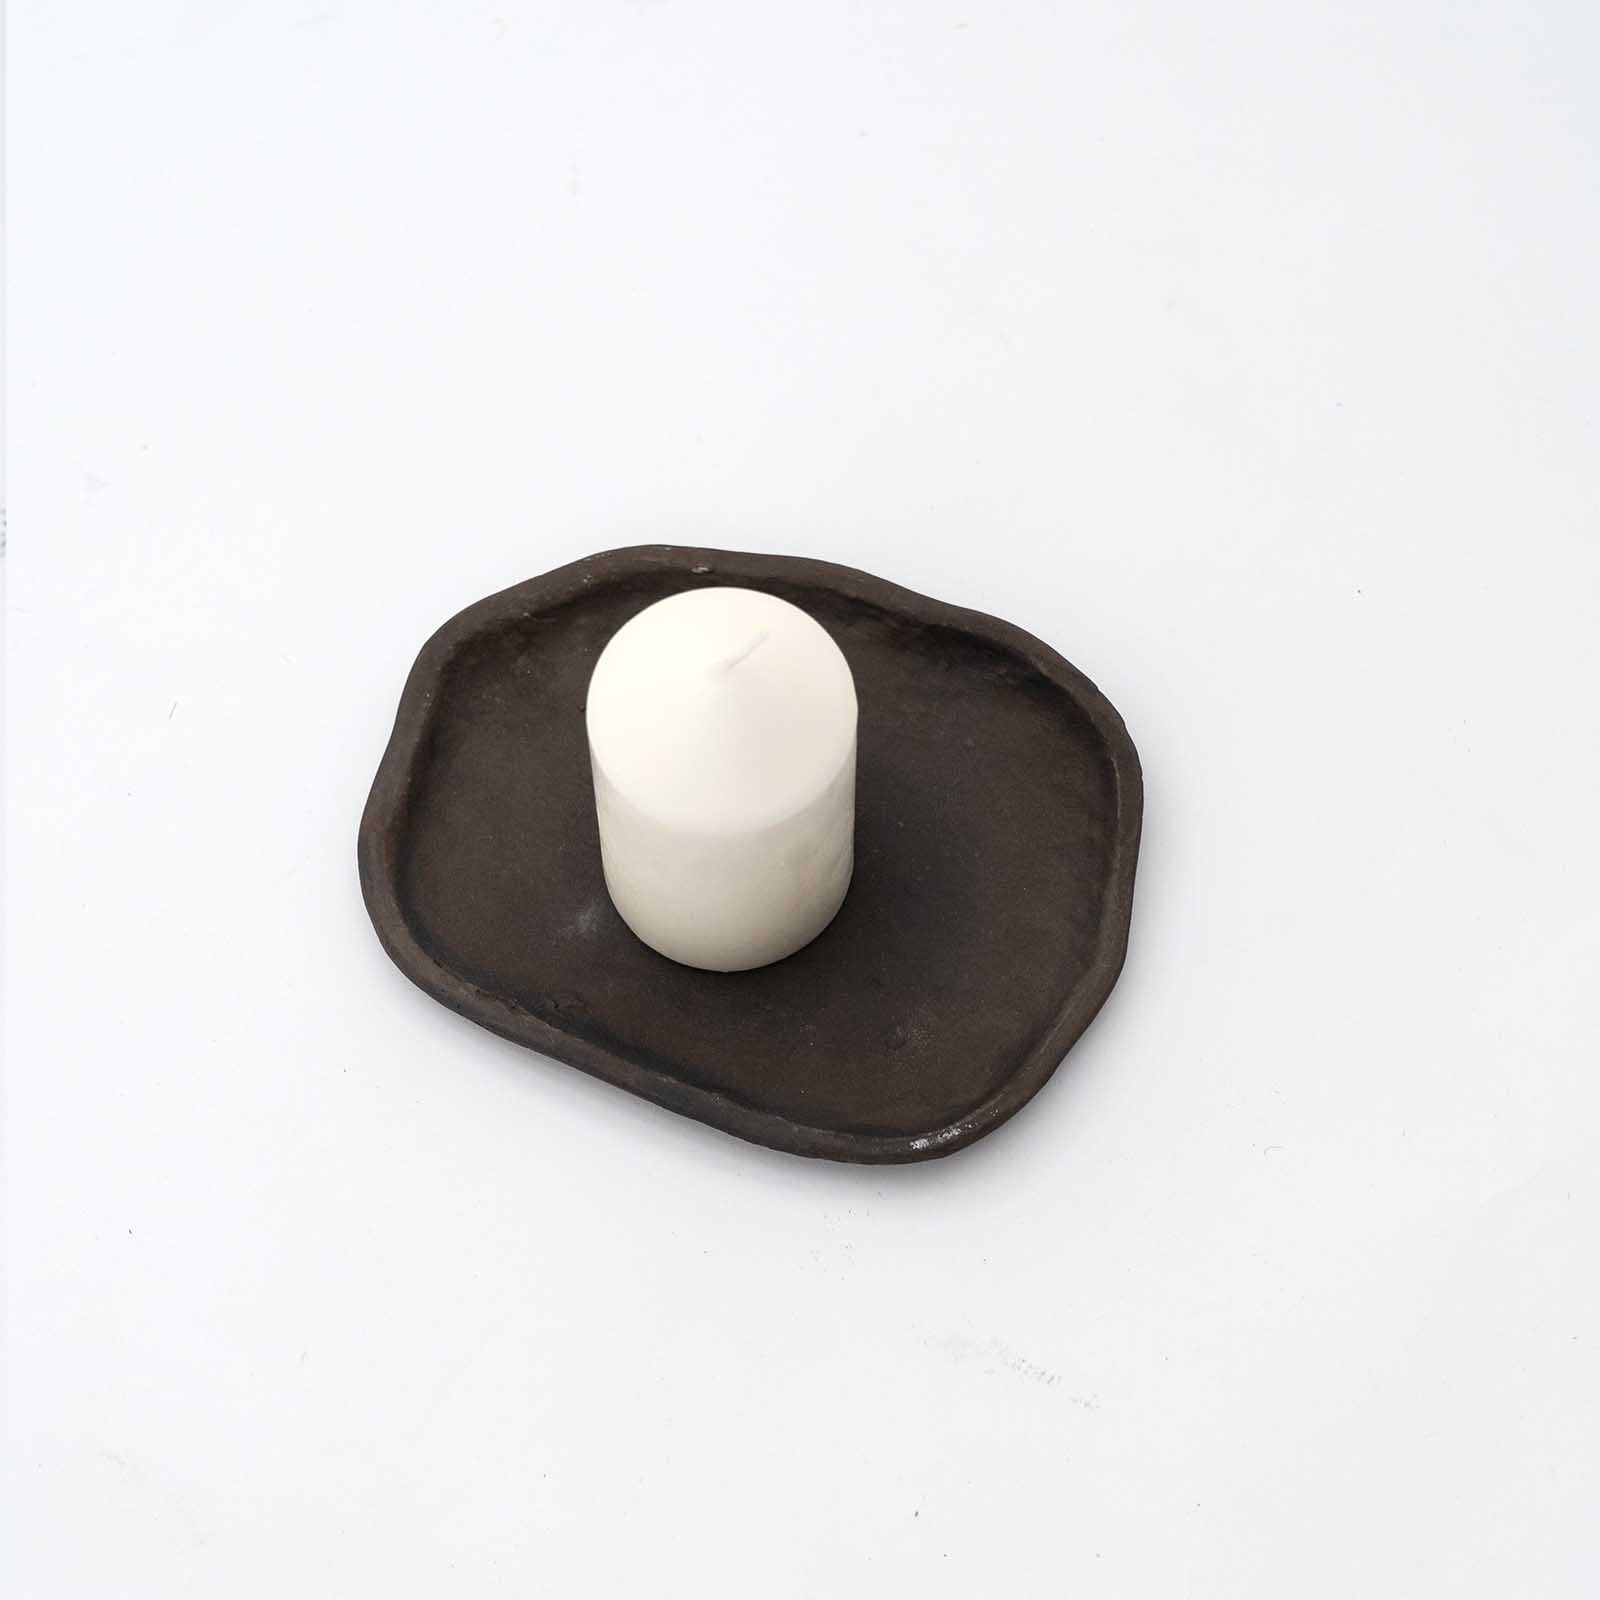 Candle Plates - Wood and Steel Furnitures